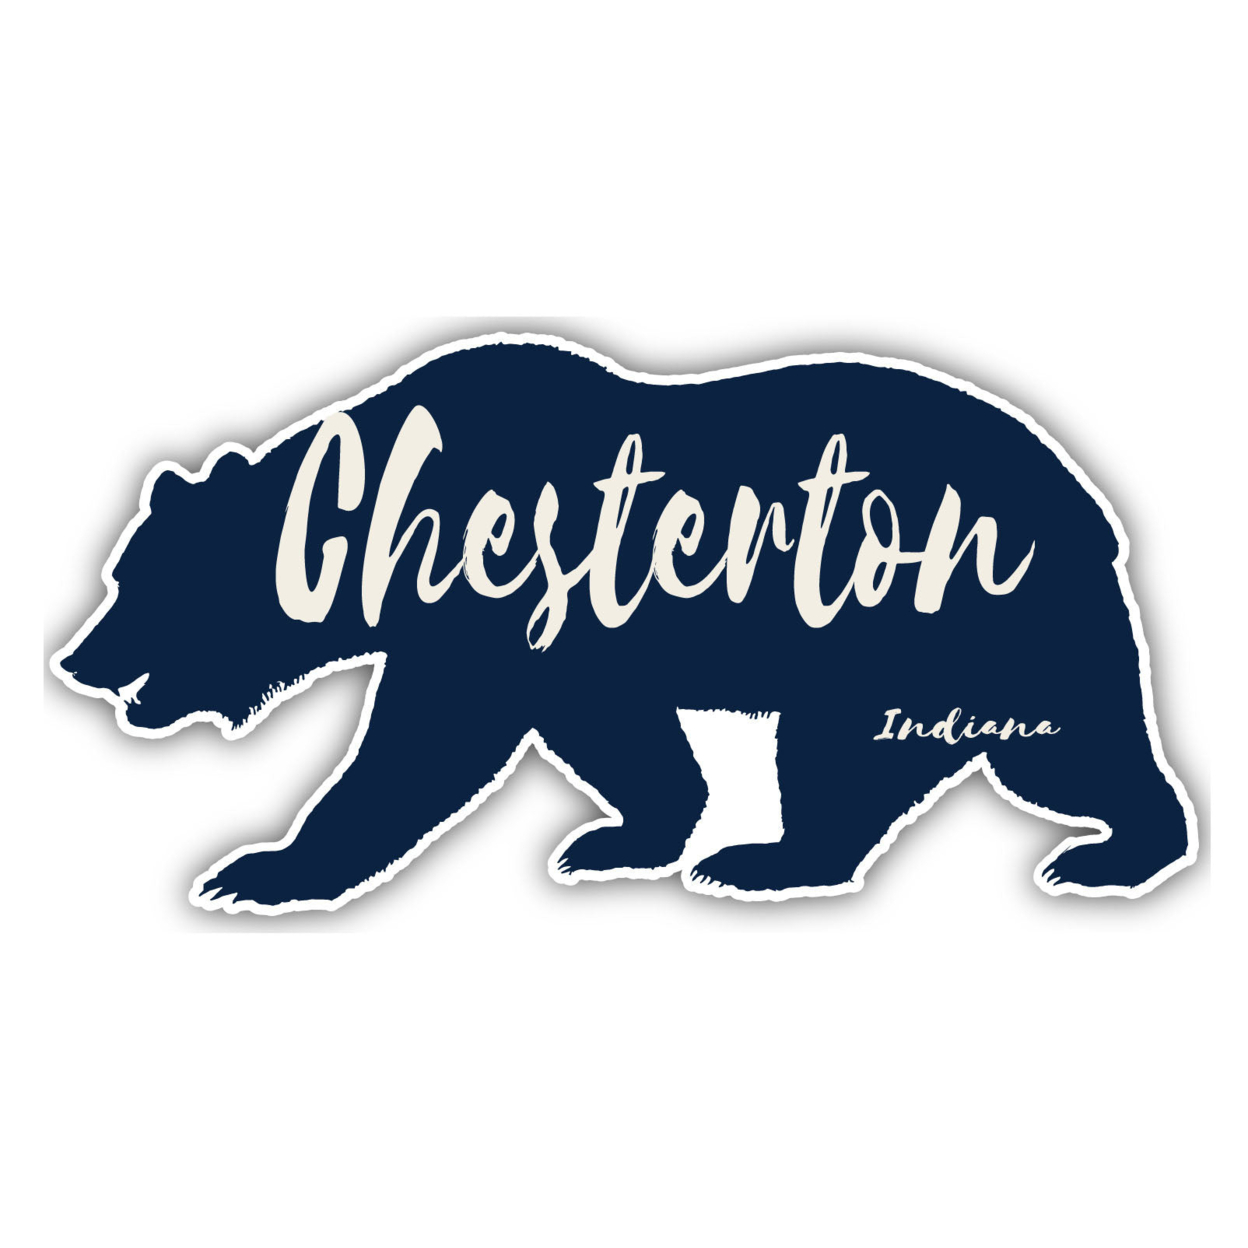 Chesterton Indiana Souvenir Decorative Stickers (Choose Theme And Size) - 4-Pack, 6-Inch, Tent